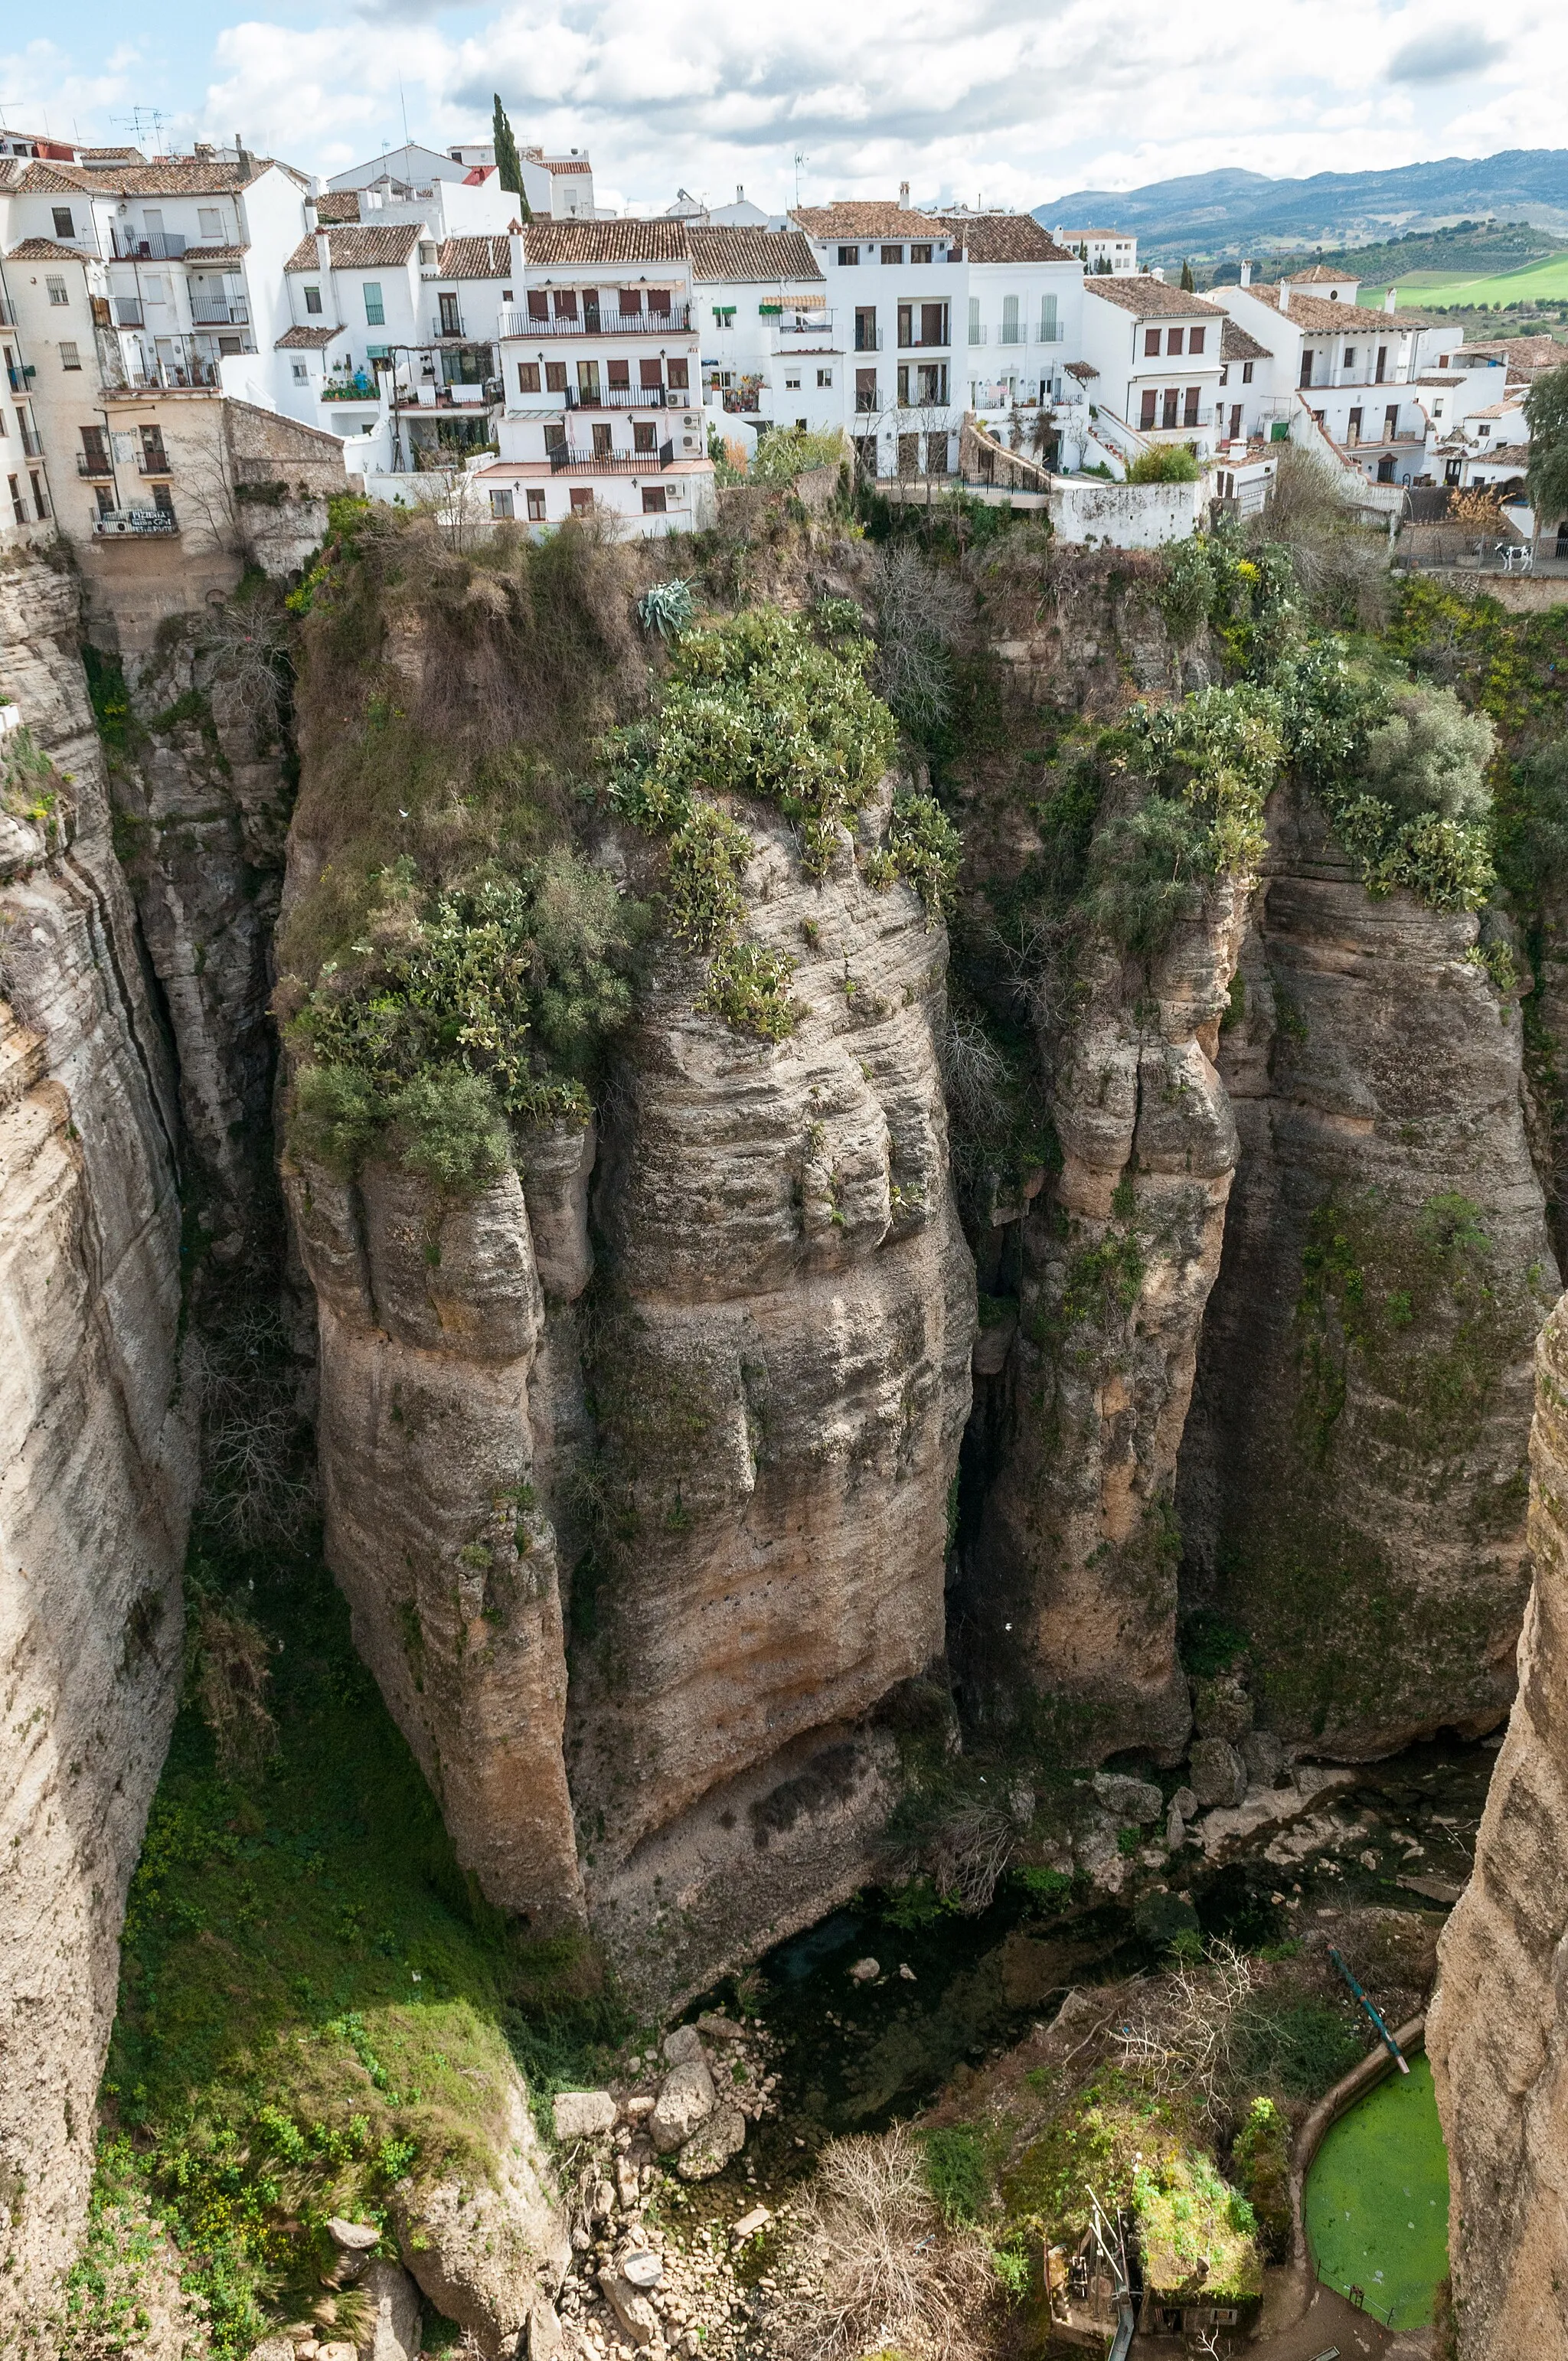 Photo showing: Ronda is a city in the Spanish province of Málaga. It is located about 100 kilometers (62 mi) west of the city of Málaga, within the autonomous community of Andalusia. Its population is approximately 35,000 inhabitants. Ronda is situated in a very mountainous area about 750 m above mean sea level. The Guadalevín River runs through the city, dividing it in two and carving out the steep, 100 plus meters deep El Tajo canyon upon which the city perches.
Ronda. (2012, March 26). In Wikipedia, The Free Encyclopedia. Retrieved 19:09, April 14, 2012, from en.wikipedia.org/w/index.php?title=Ronda&oldid=483938...